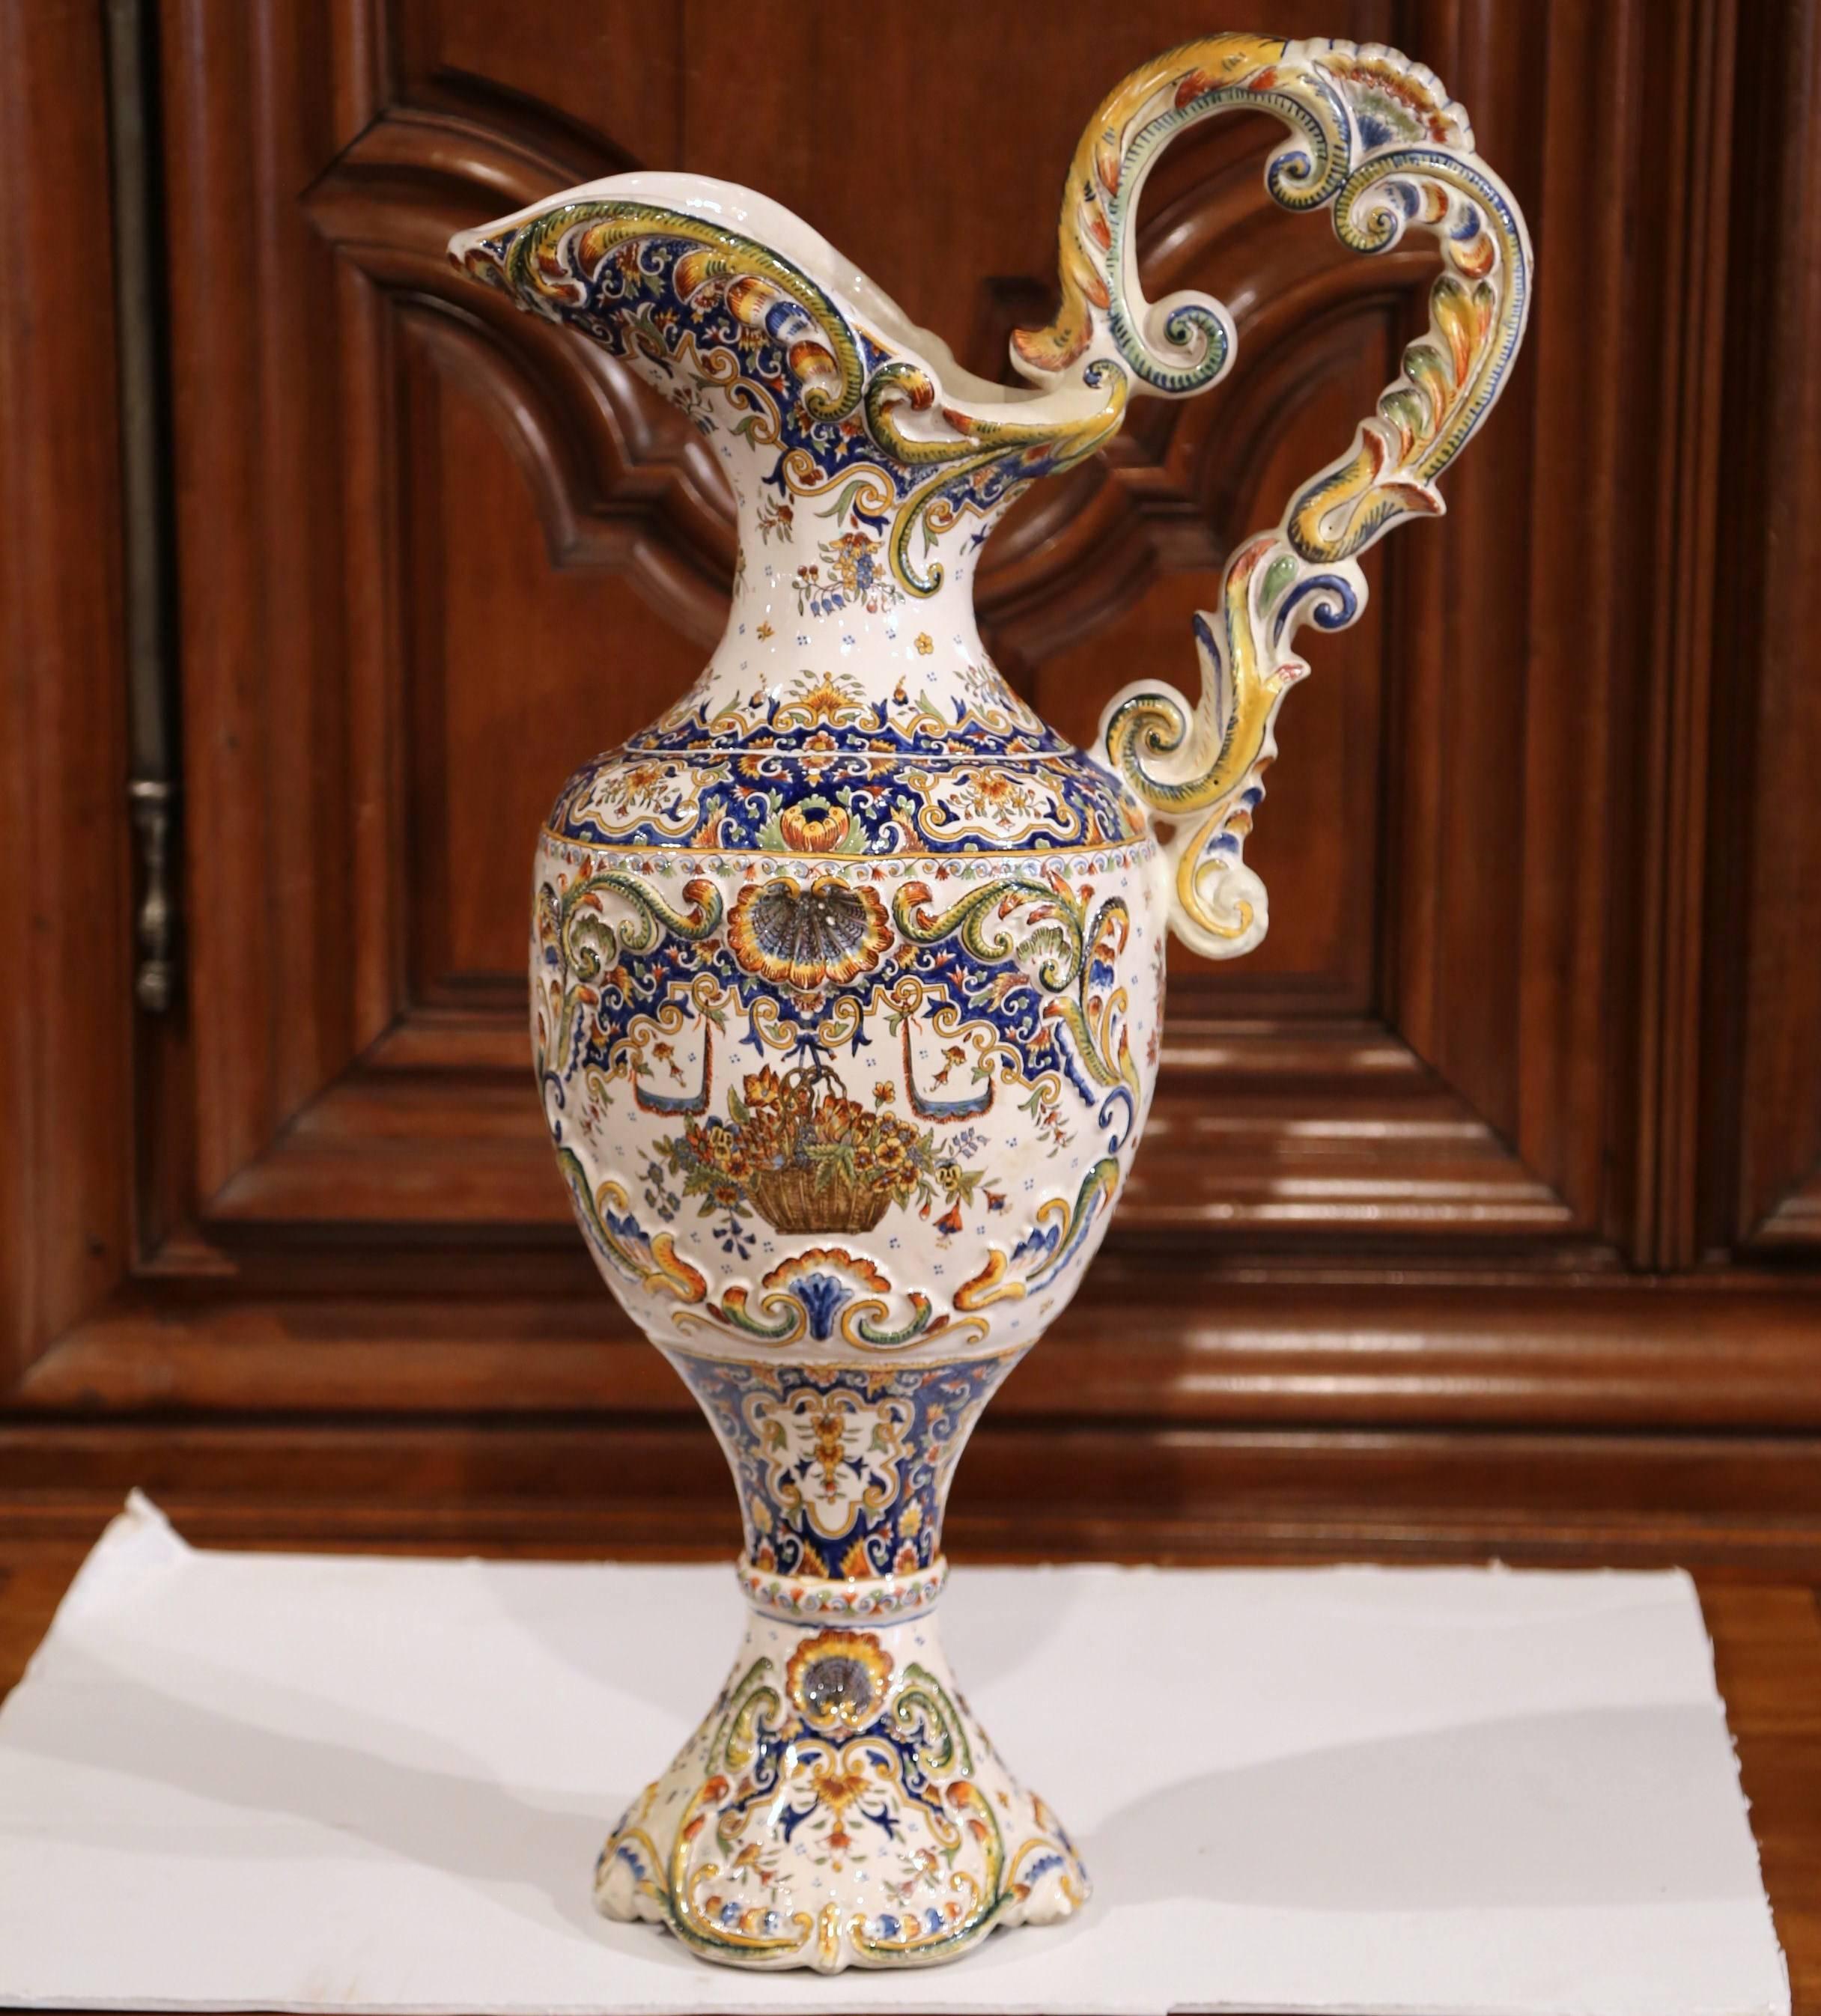 19th Century French Hand Painted Faience Ewer Vase from Normandy In Excellent Condition For Sale In Dallas, TX